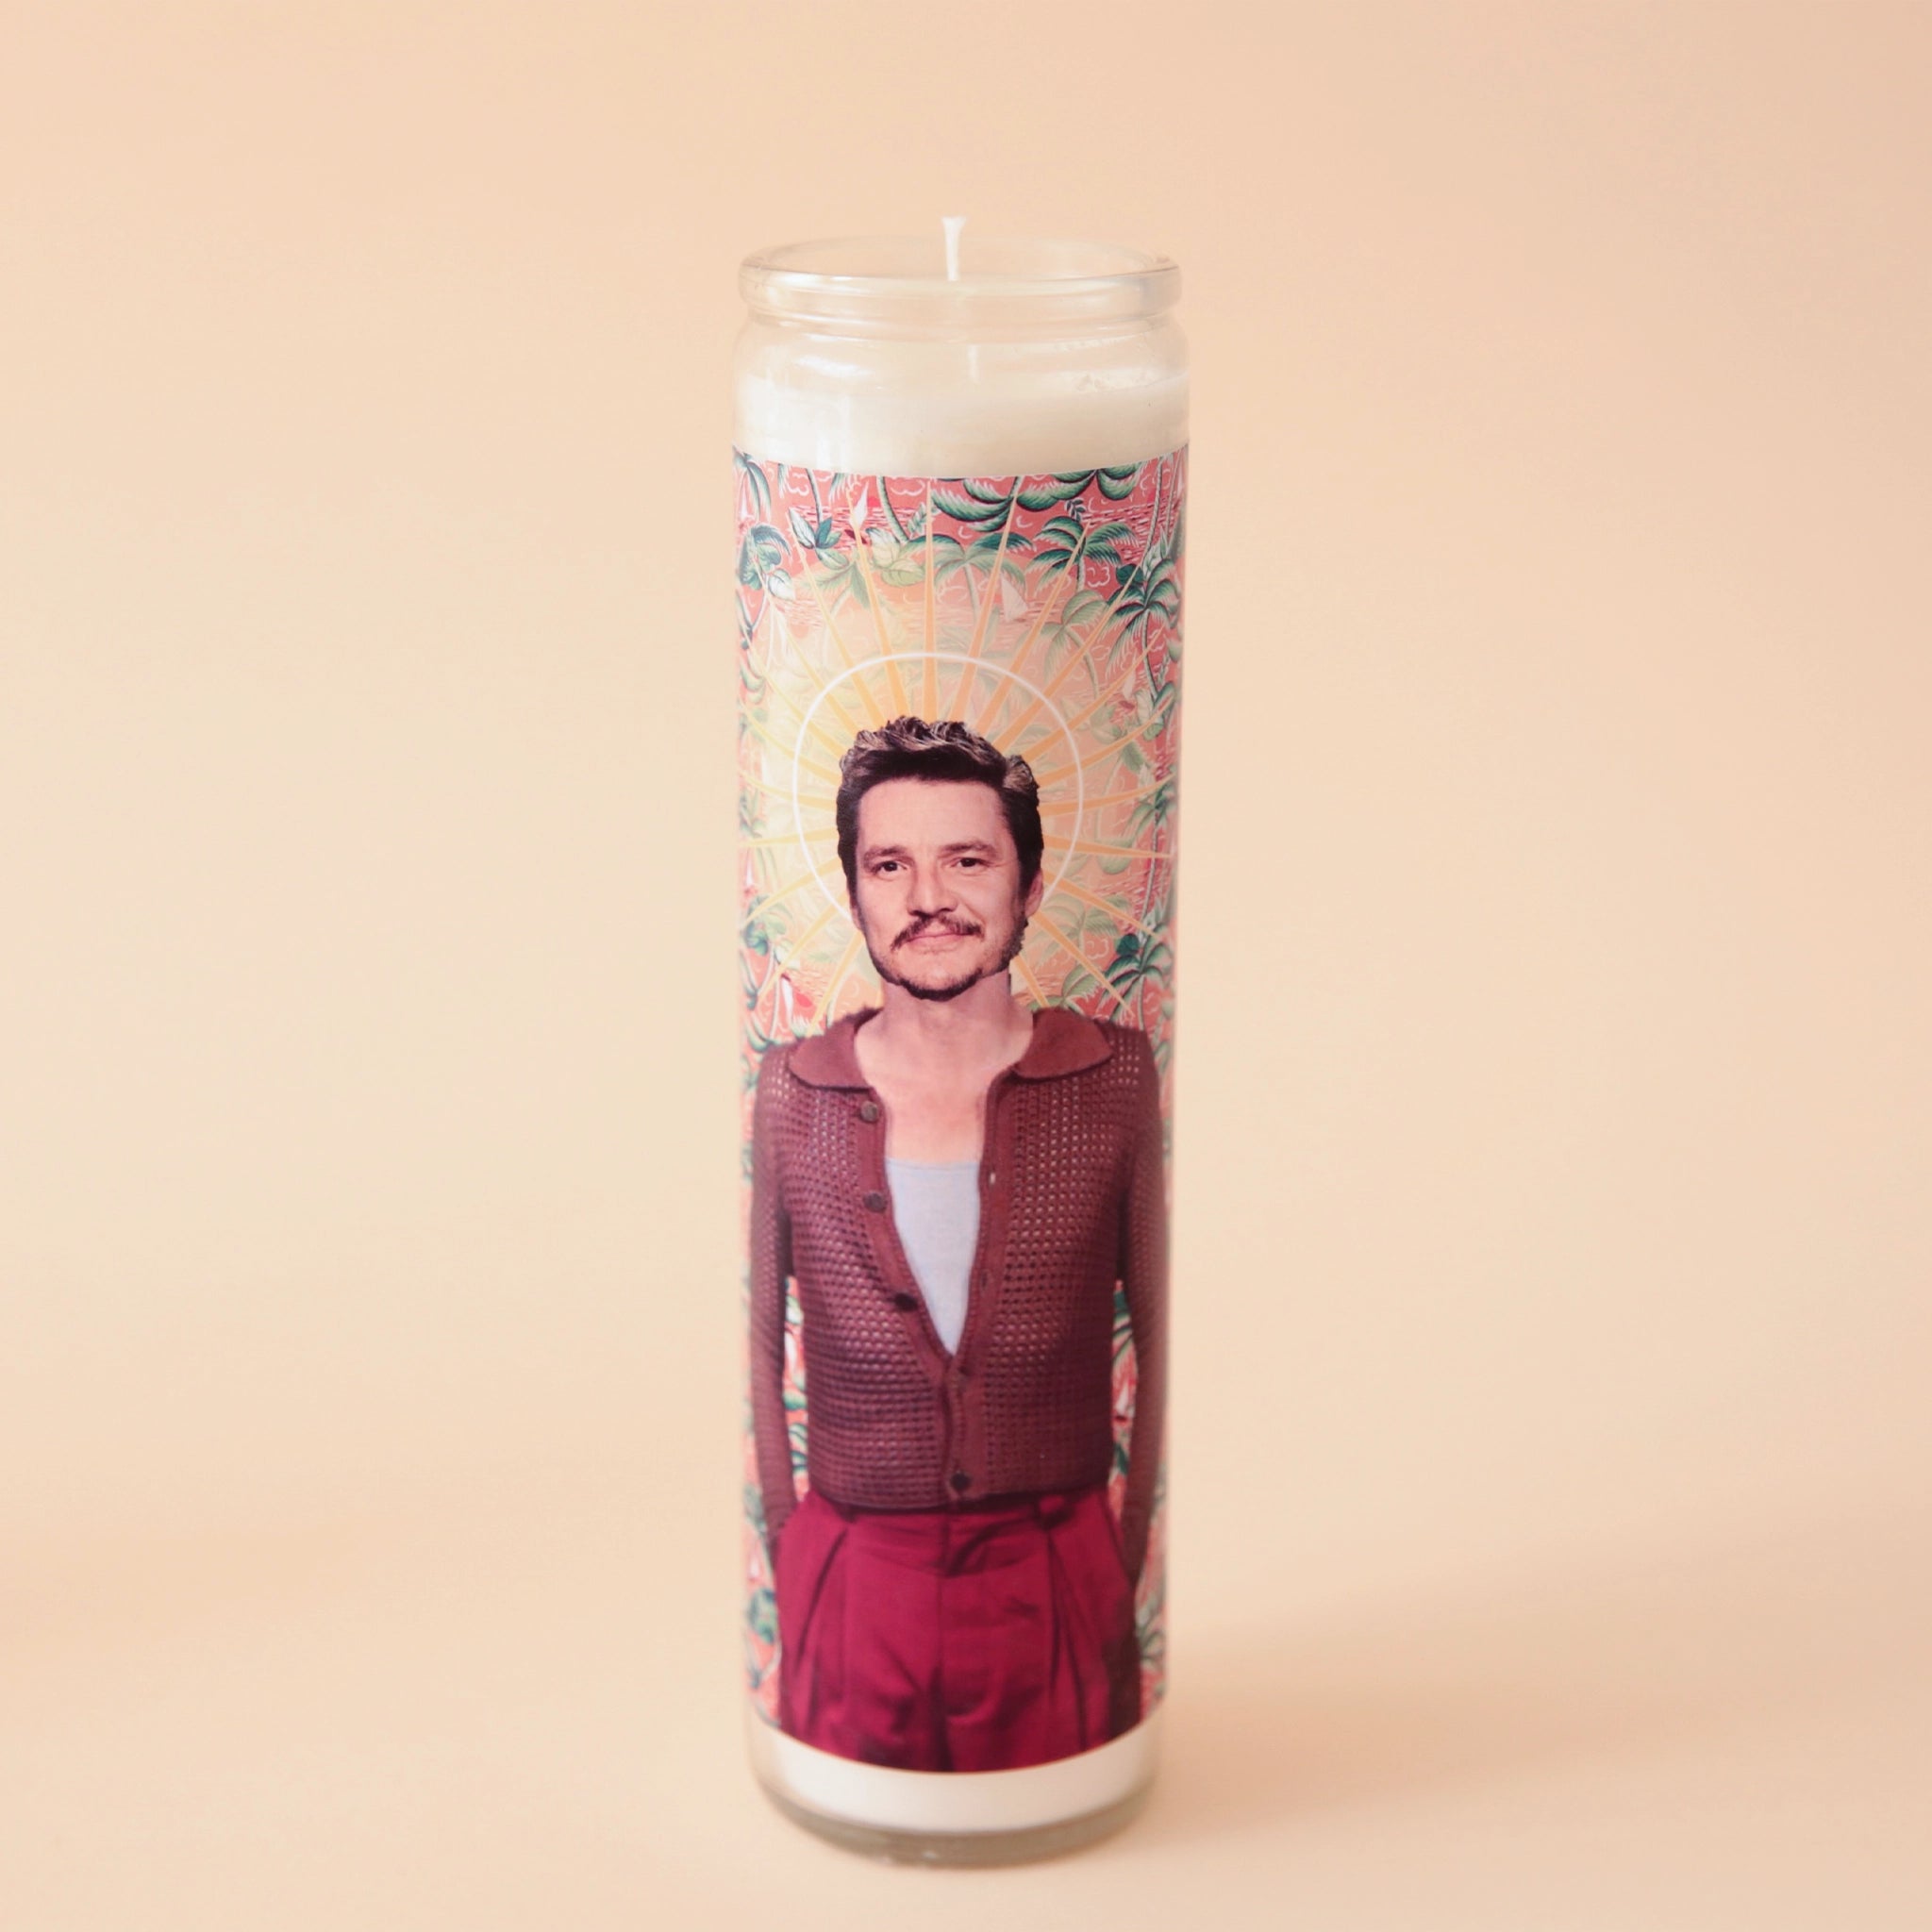 On a cream background is a tall thin prayer candles in a clear glass jar with a label around it that features a photograph of Pedro Pascal on the front in a red outfit. 